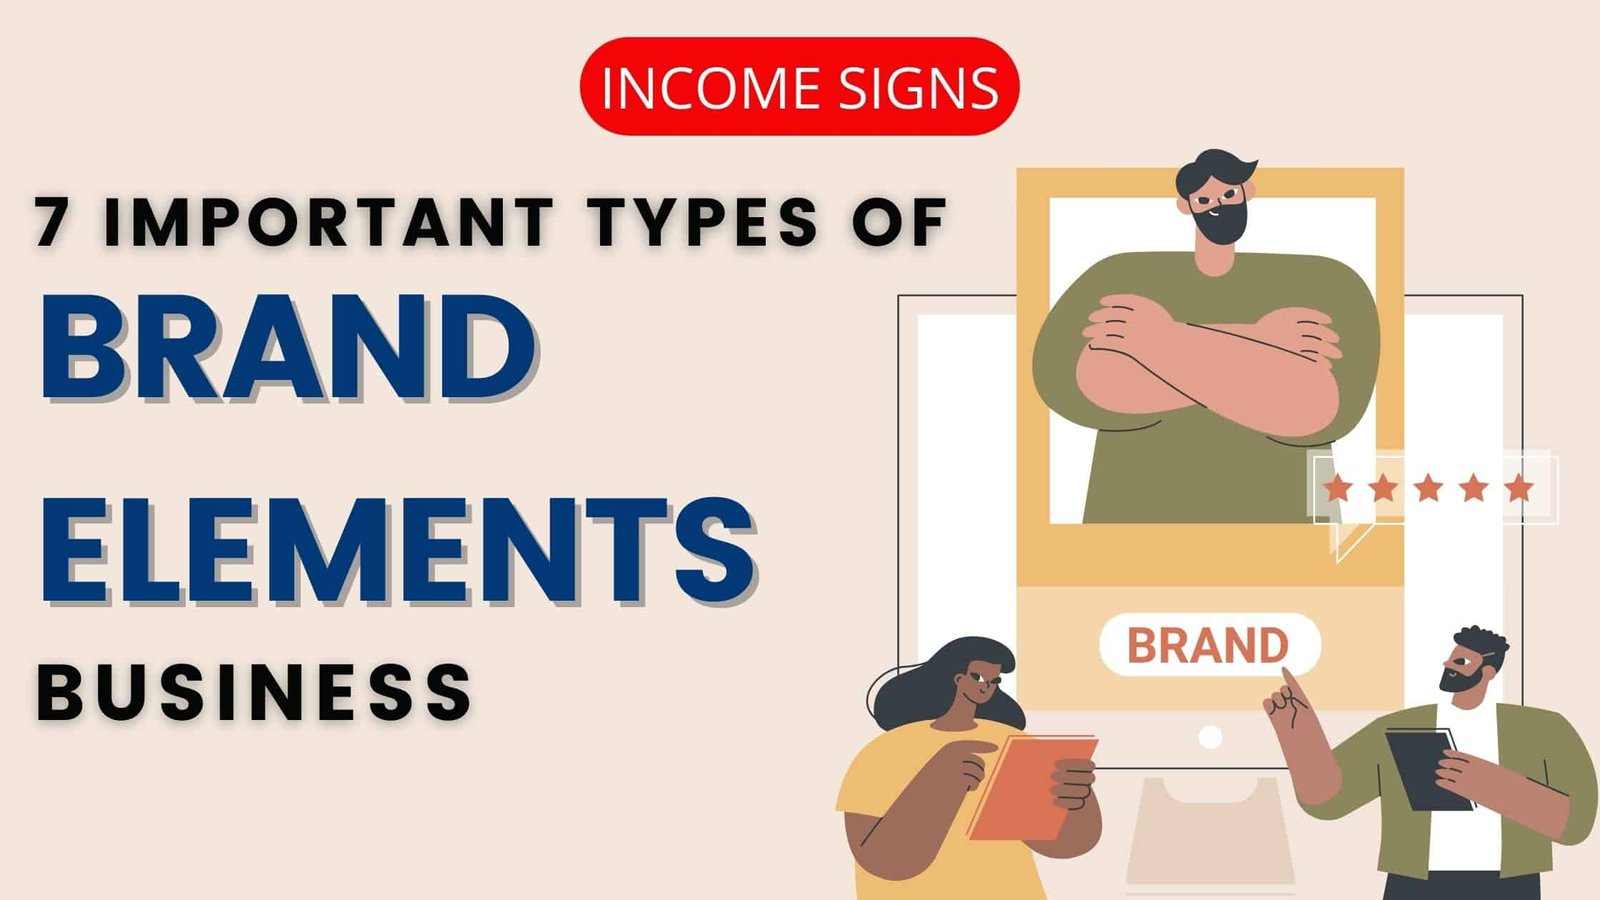 7 Important Types of Brand Elements for your Business